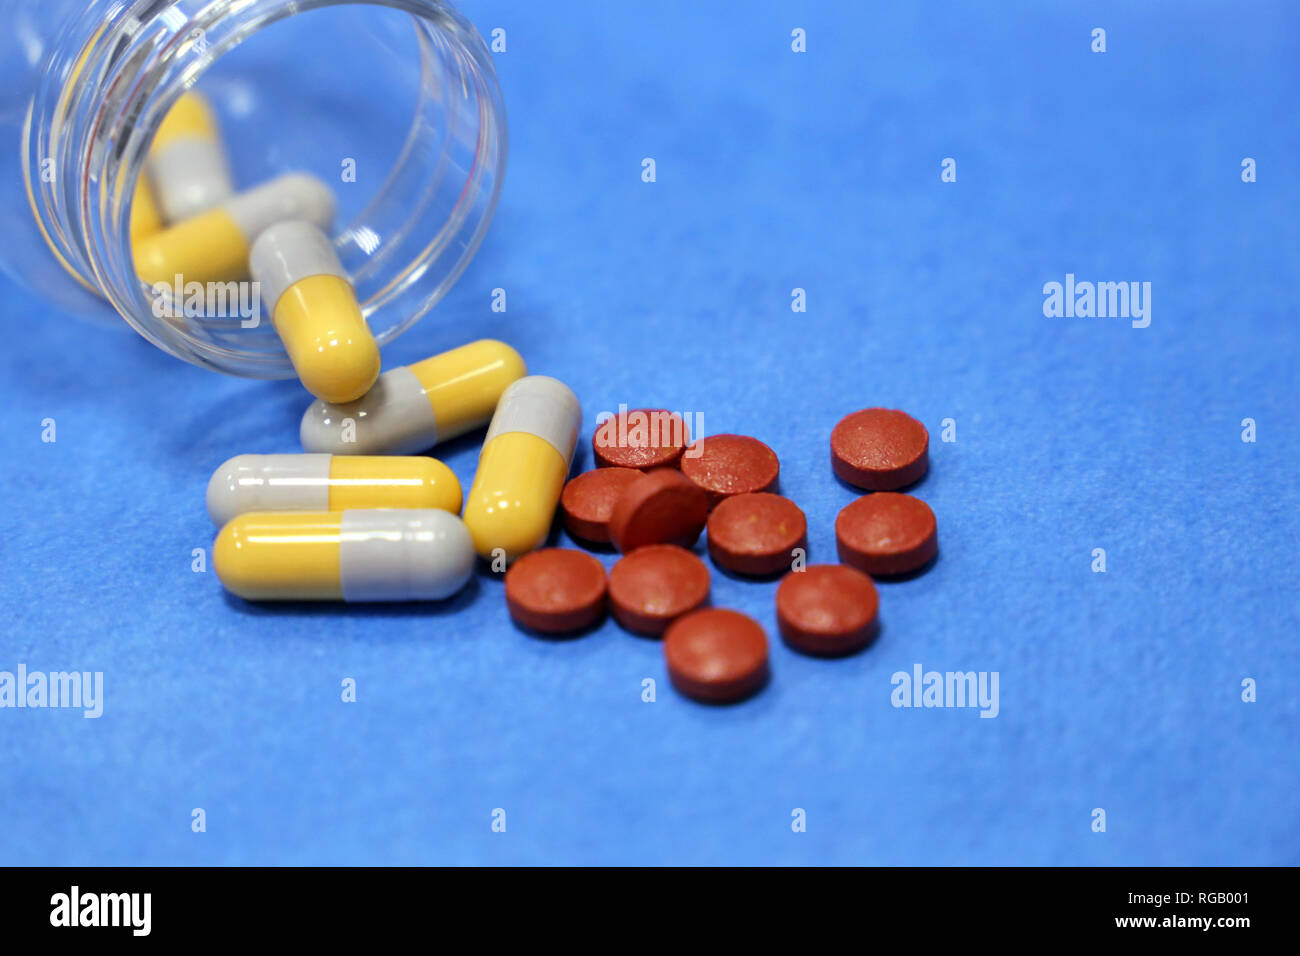 Pills and capsules in bottle on blue background. Concept of drugs, antibiotics, vitamins, pharmacy, treatment during the cold season, polypharmacy Stock Photo